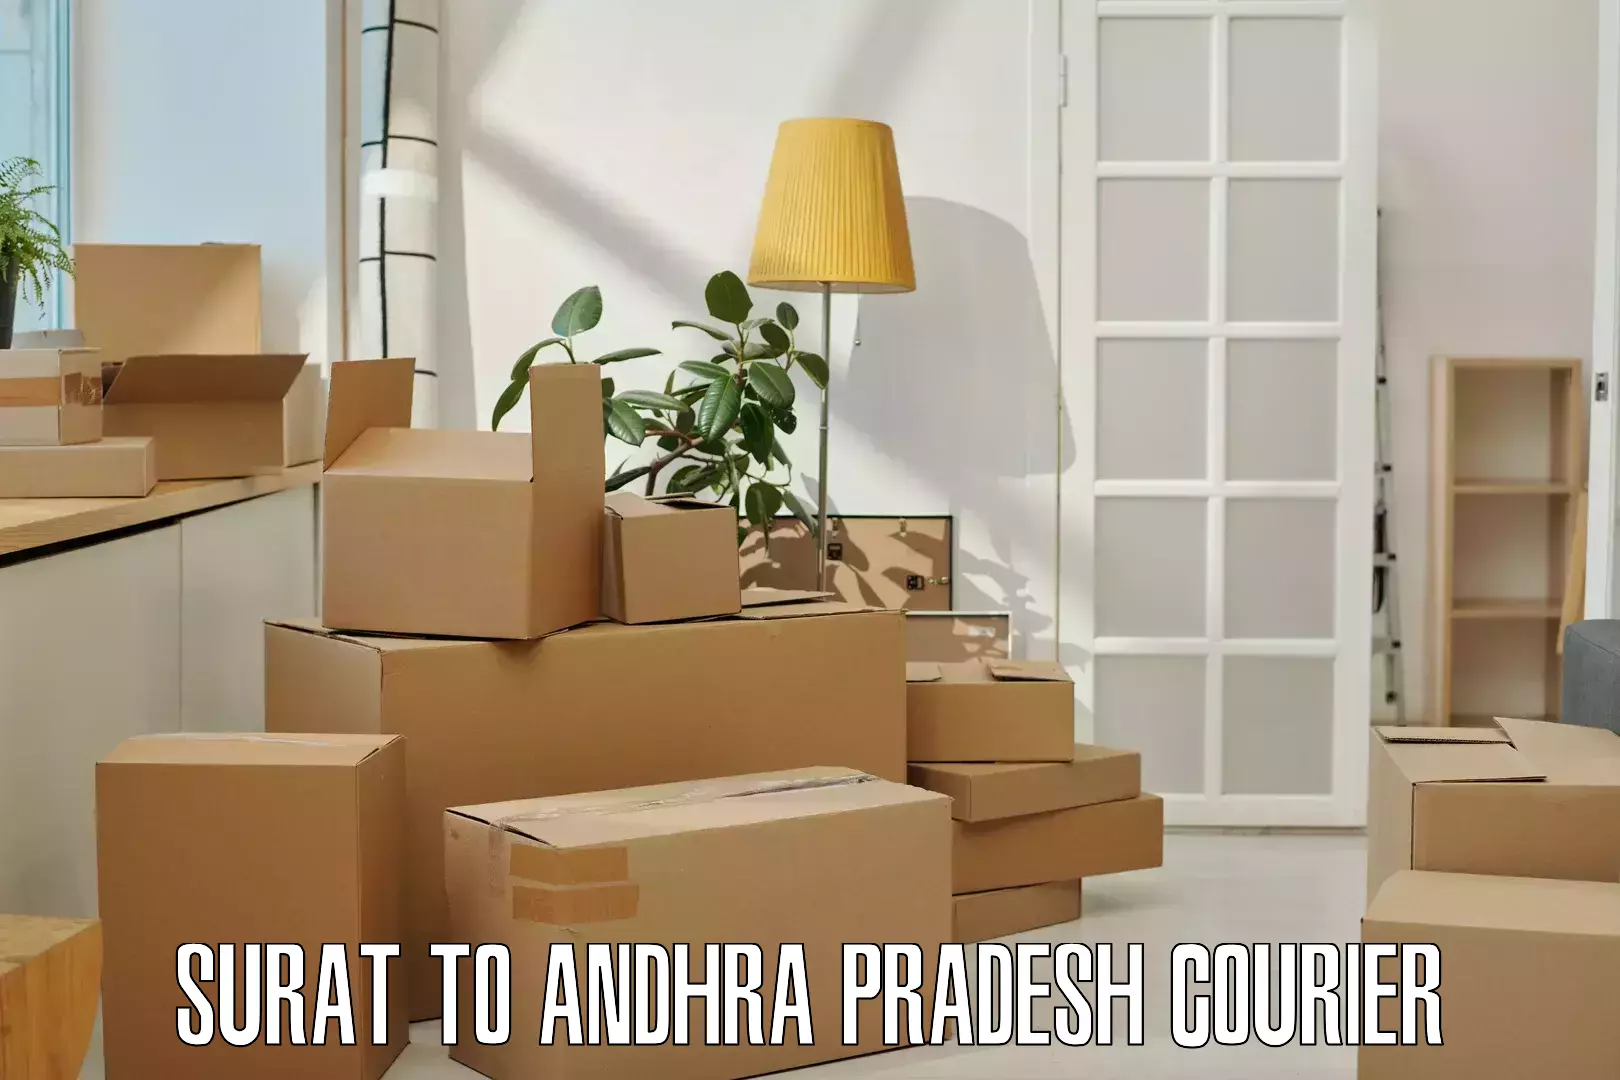 State-of-the-art courier technology Surat to Andhra Pradesh